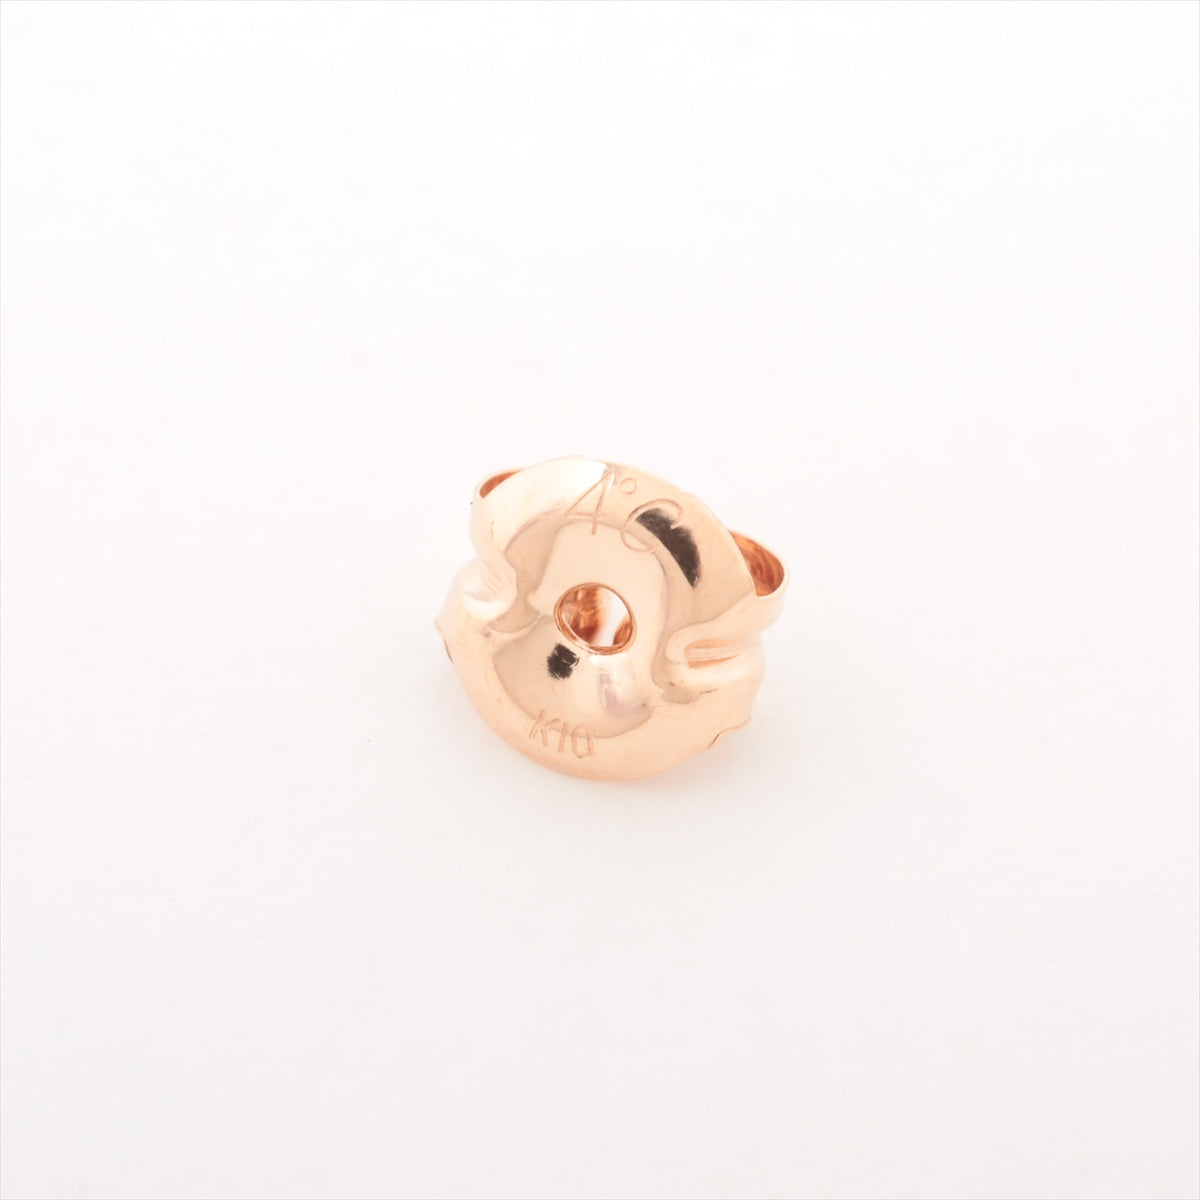 4℃ Color stone Piercing jewelry K10(PG) 0.6g